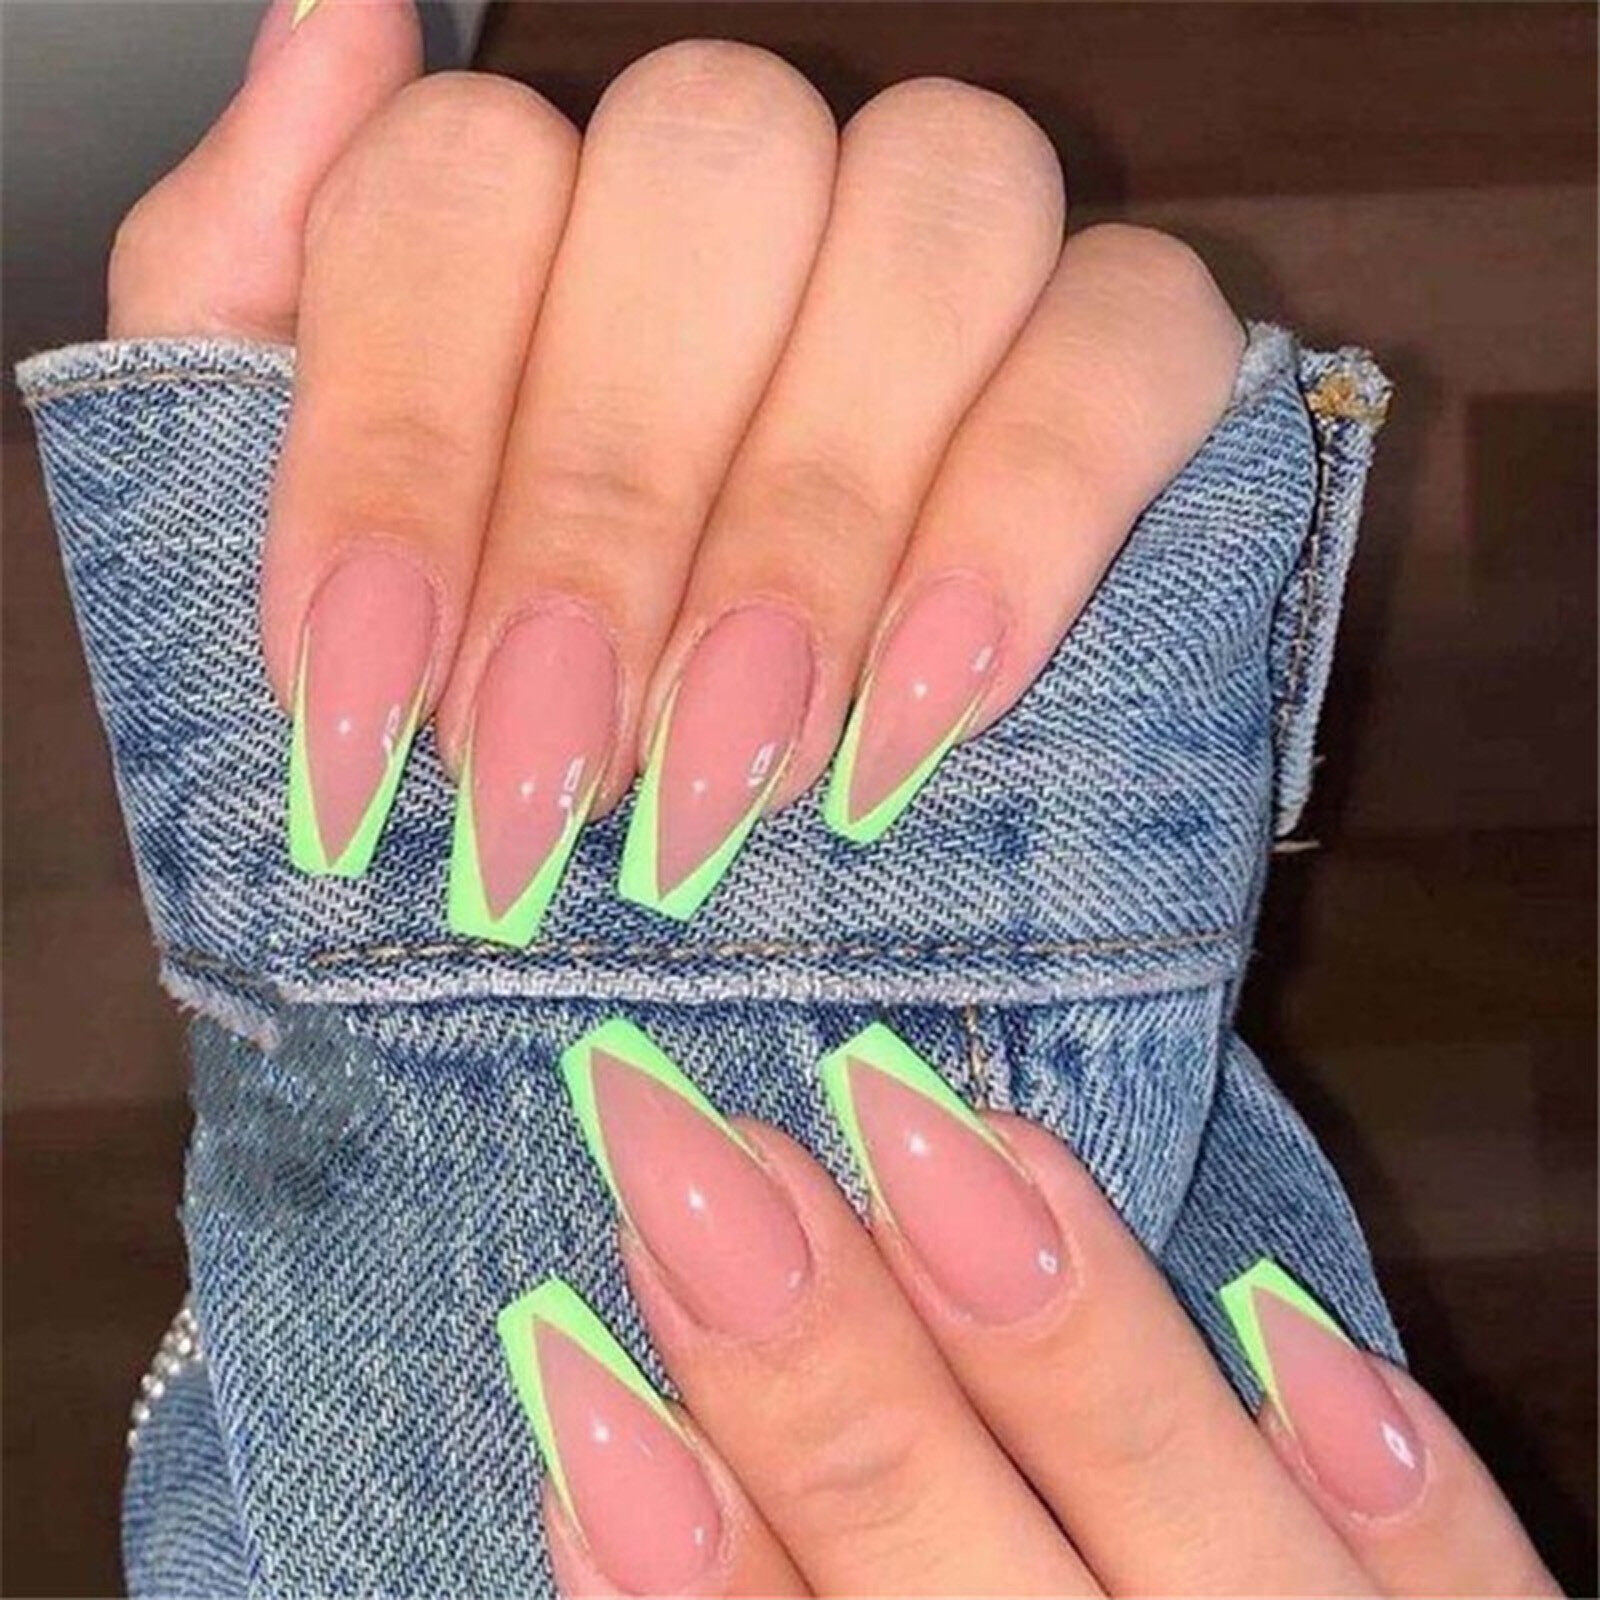 Ballerina nails. 1 75+ Hottest Looking Nail Shapes for Women - 56